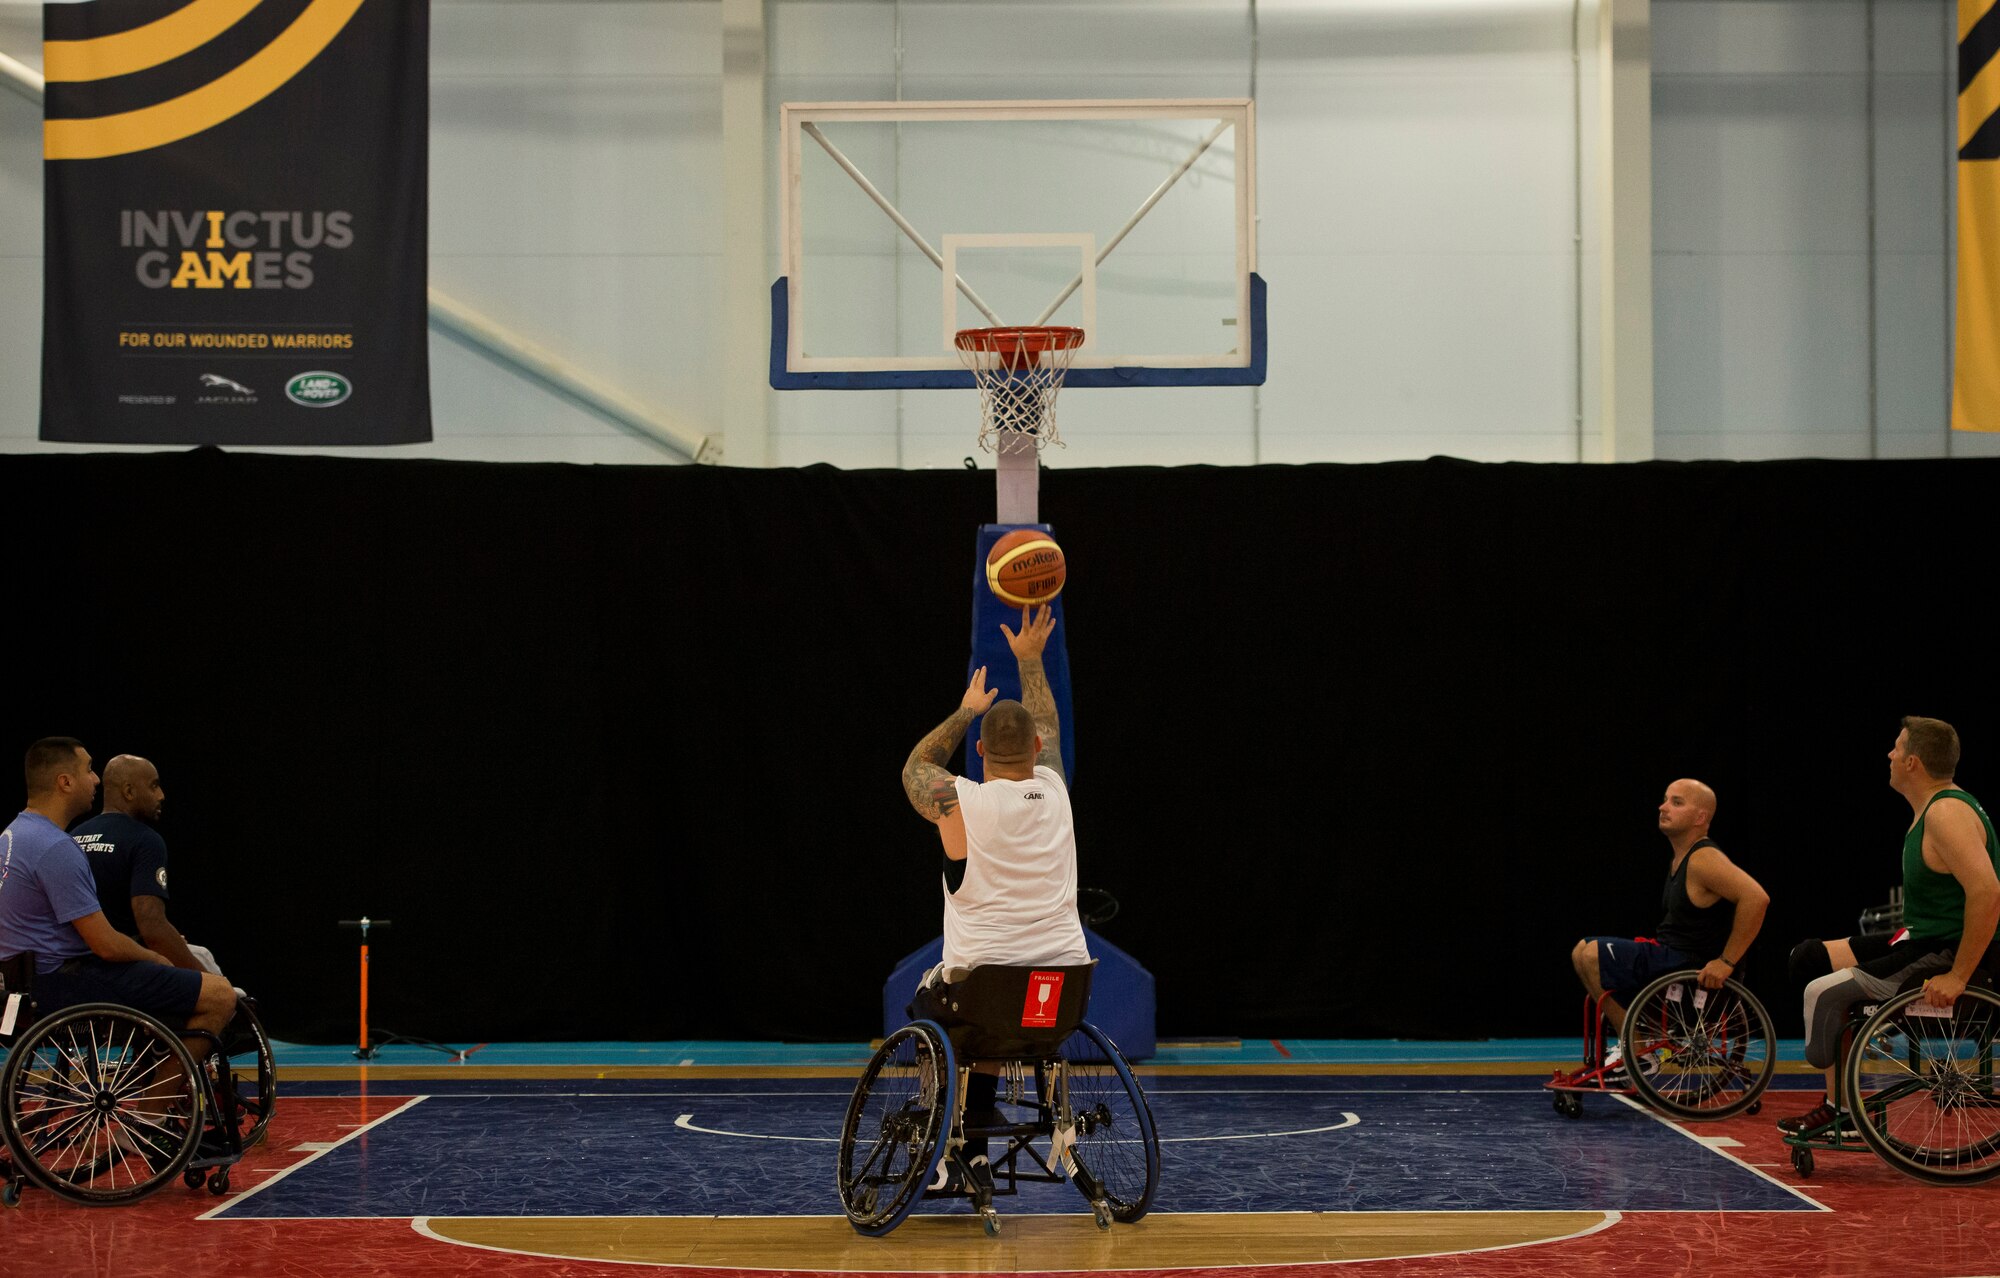 Steven Davis, a retired U.S. Navy Airman, shoots a free-throw during wheelchair basketball practice at Mayesbrook Field Sport House Sept. 8, 2014, in London. Davis is a member of the United States' wheelchair basketball team for the inaugural 2014 Invictus Games. (U.S. Air Force photo/Staff Sgt. Andrew Lee)